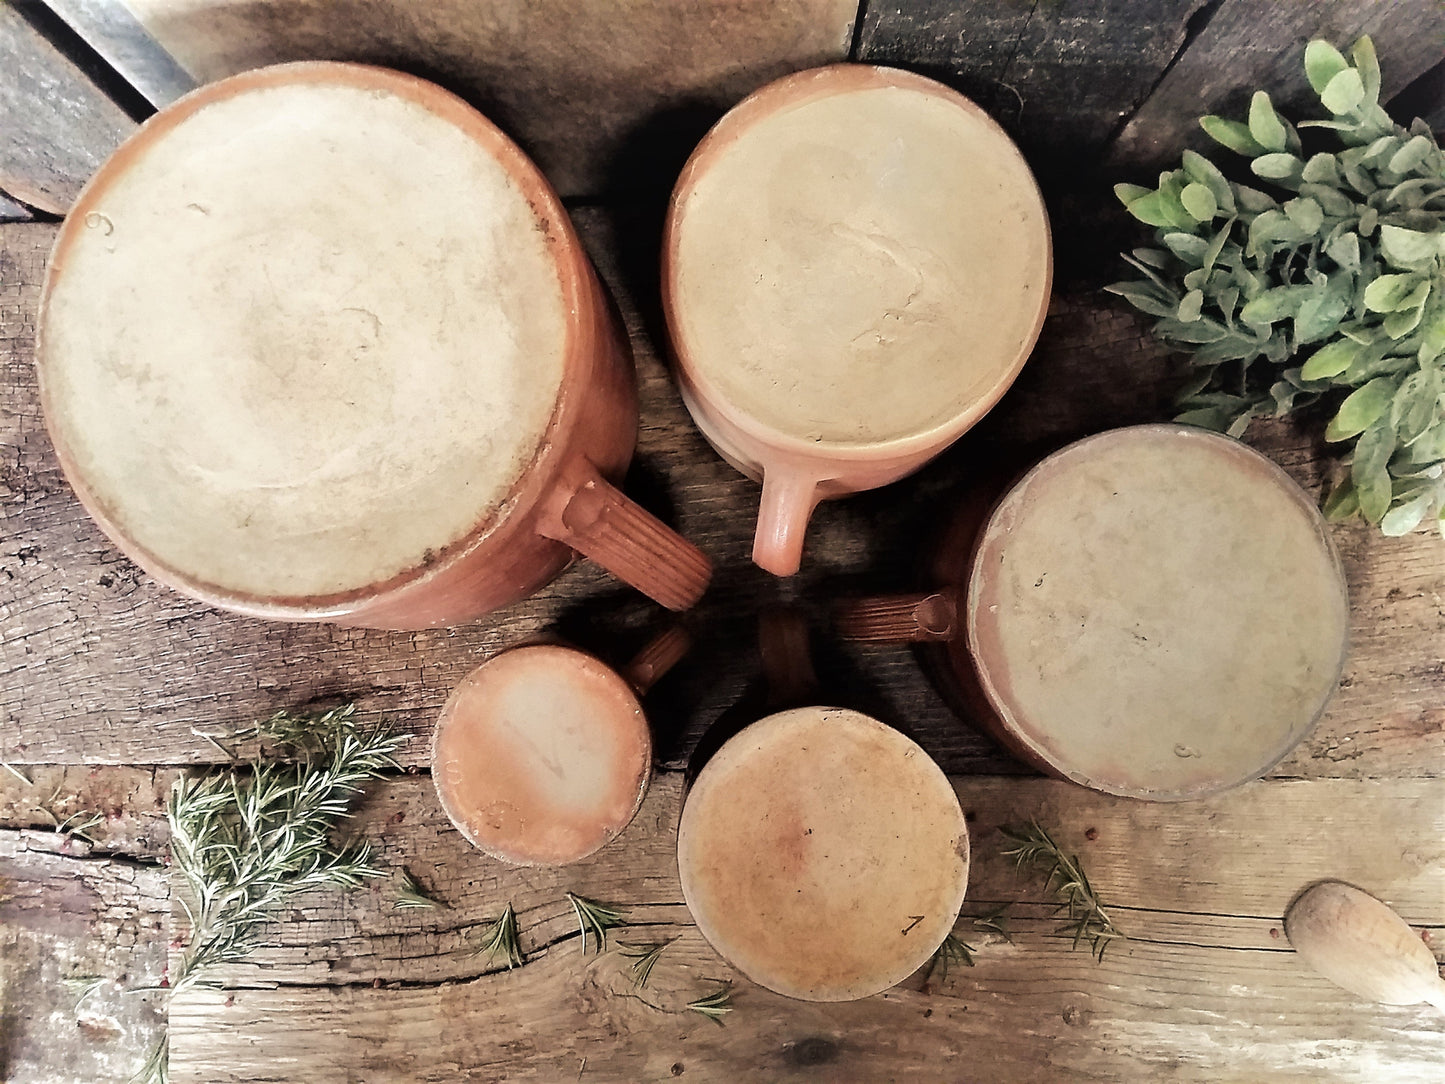 Five Antique French Confit Pots. Kitchen Planters/ Utensil Storage Jars. from Tiggy & Pip - €275.00! Shop now at Tiggy and Pip